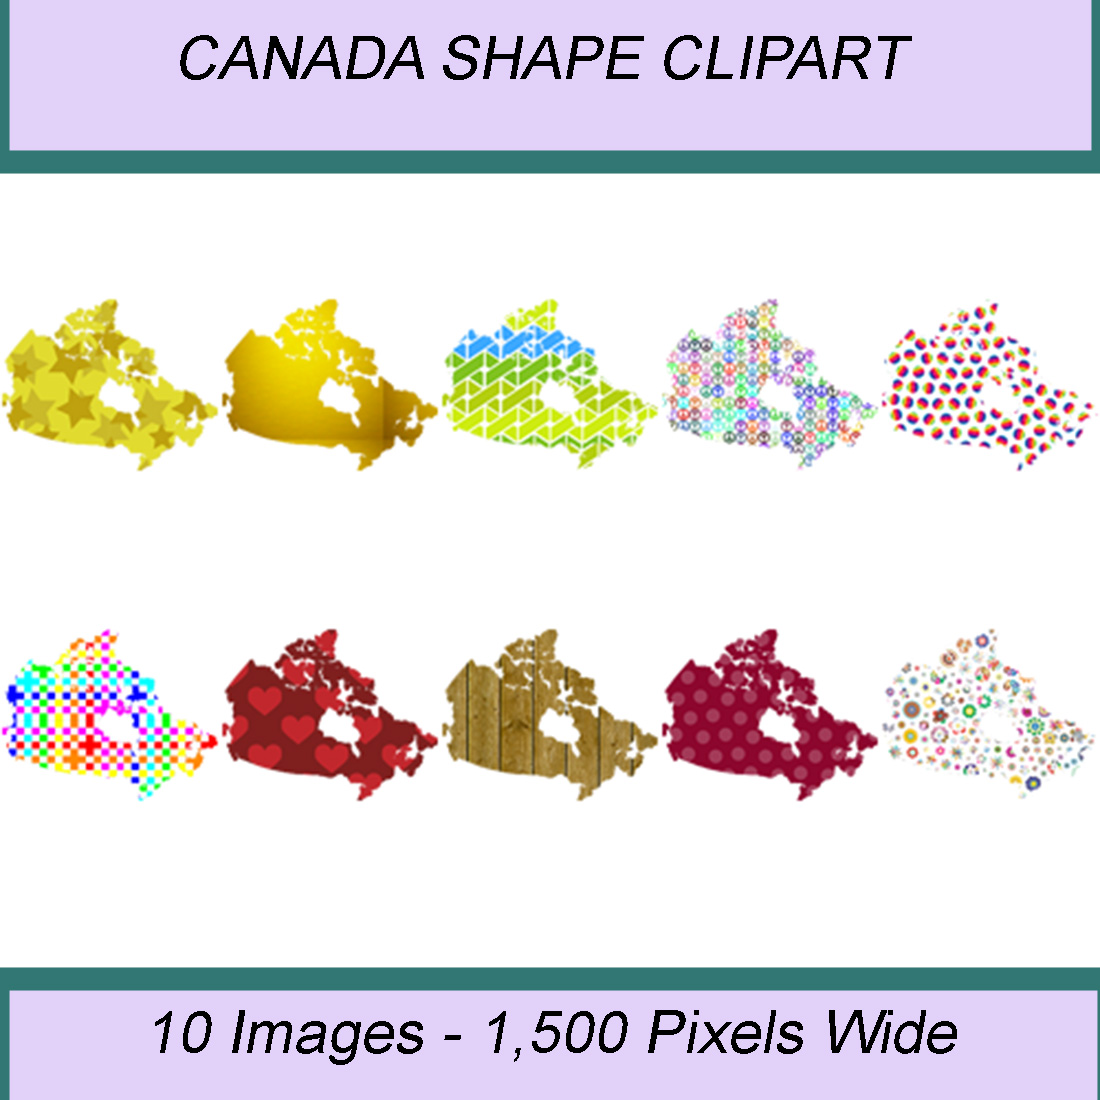 CANADA SHAPE CLIPART ICONS cover image.